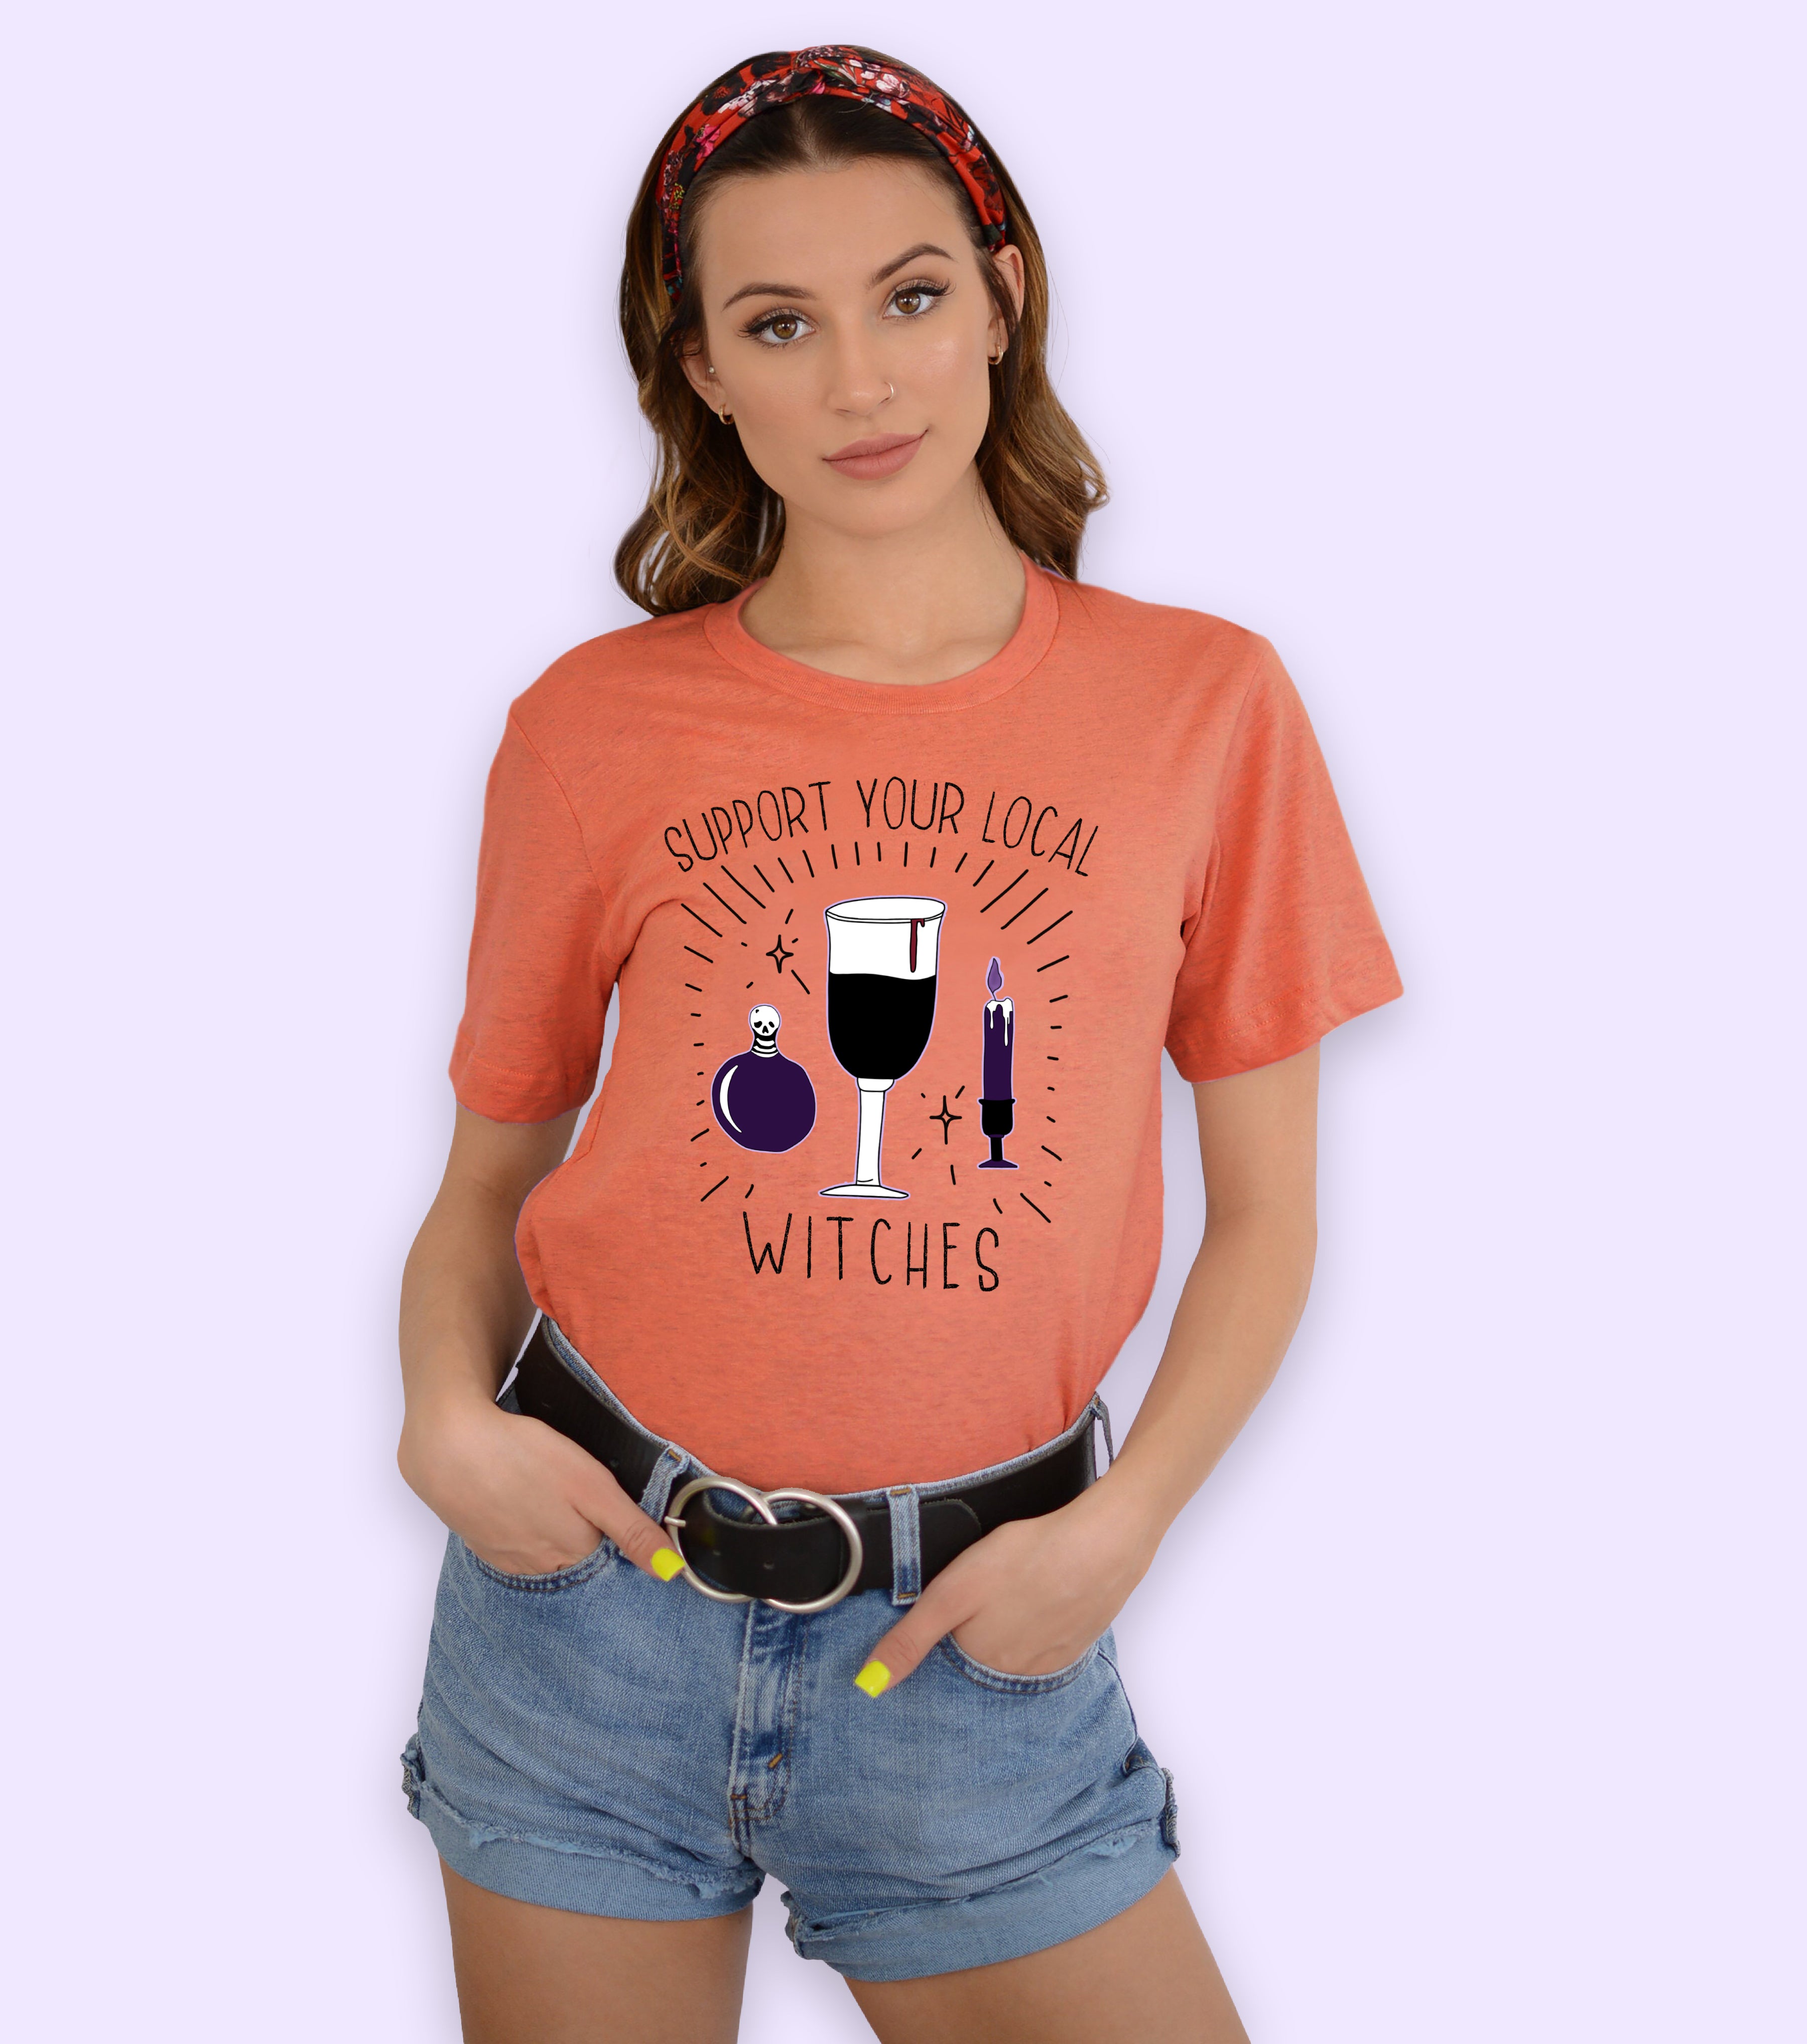 Support Your Local Witches Shirt - HighCiti